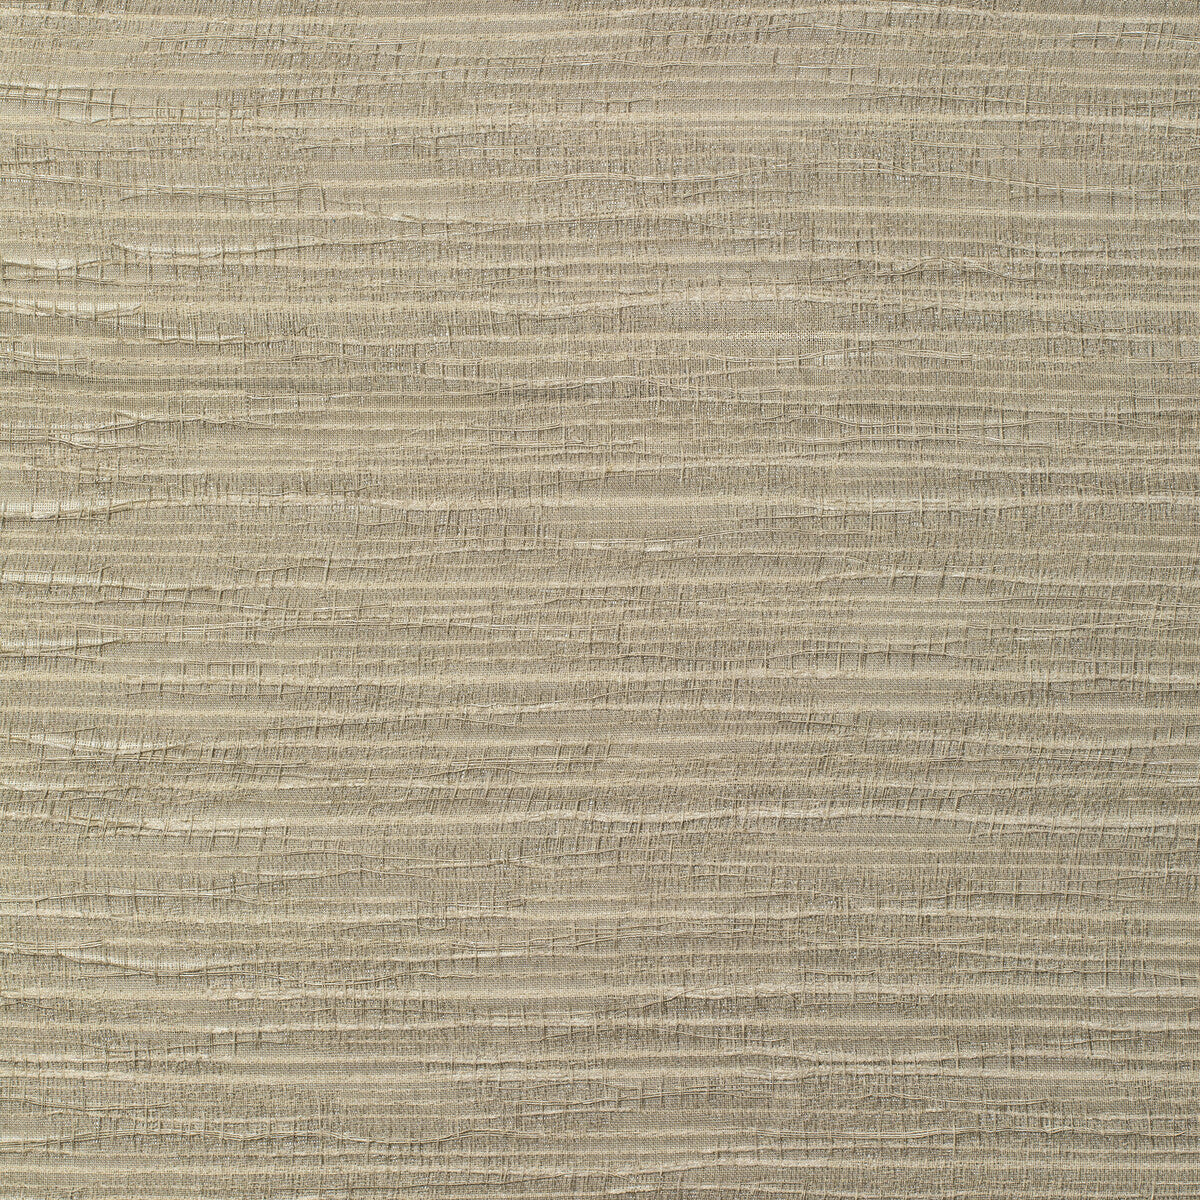 Bellasario fabric in sand color - pattern 4707.16.0 - by Kravet Couture in the Linherr Hollingsworth Boheme II collection